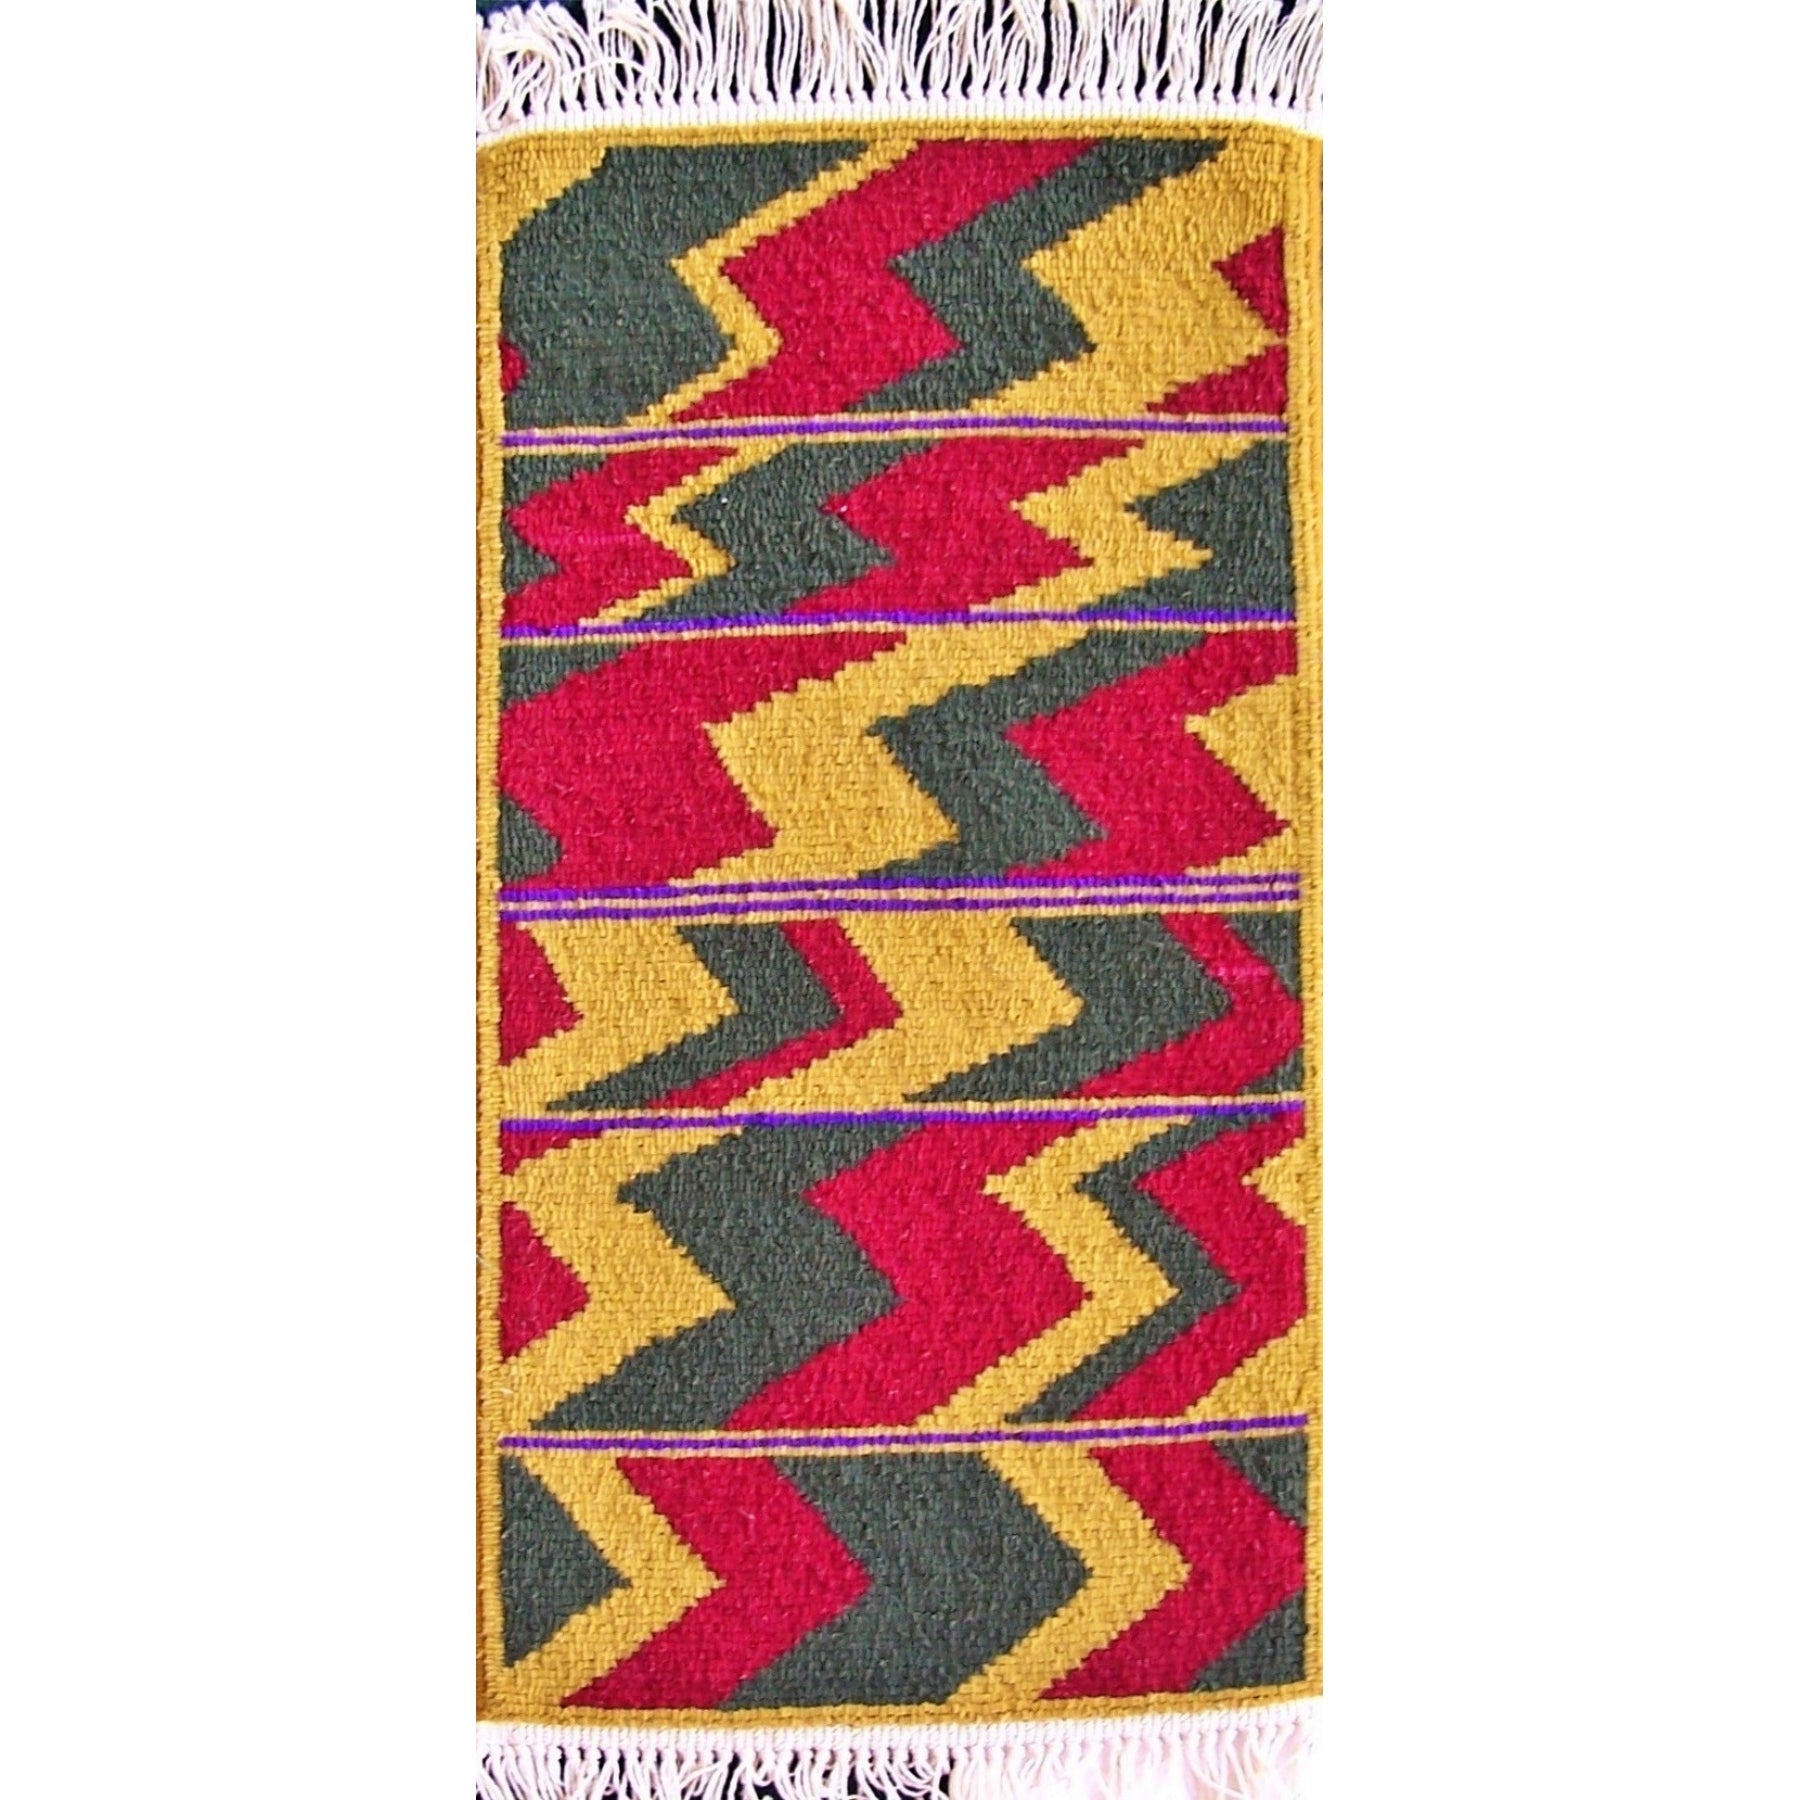 Mexican Runner, rug hooked by June Doty